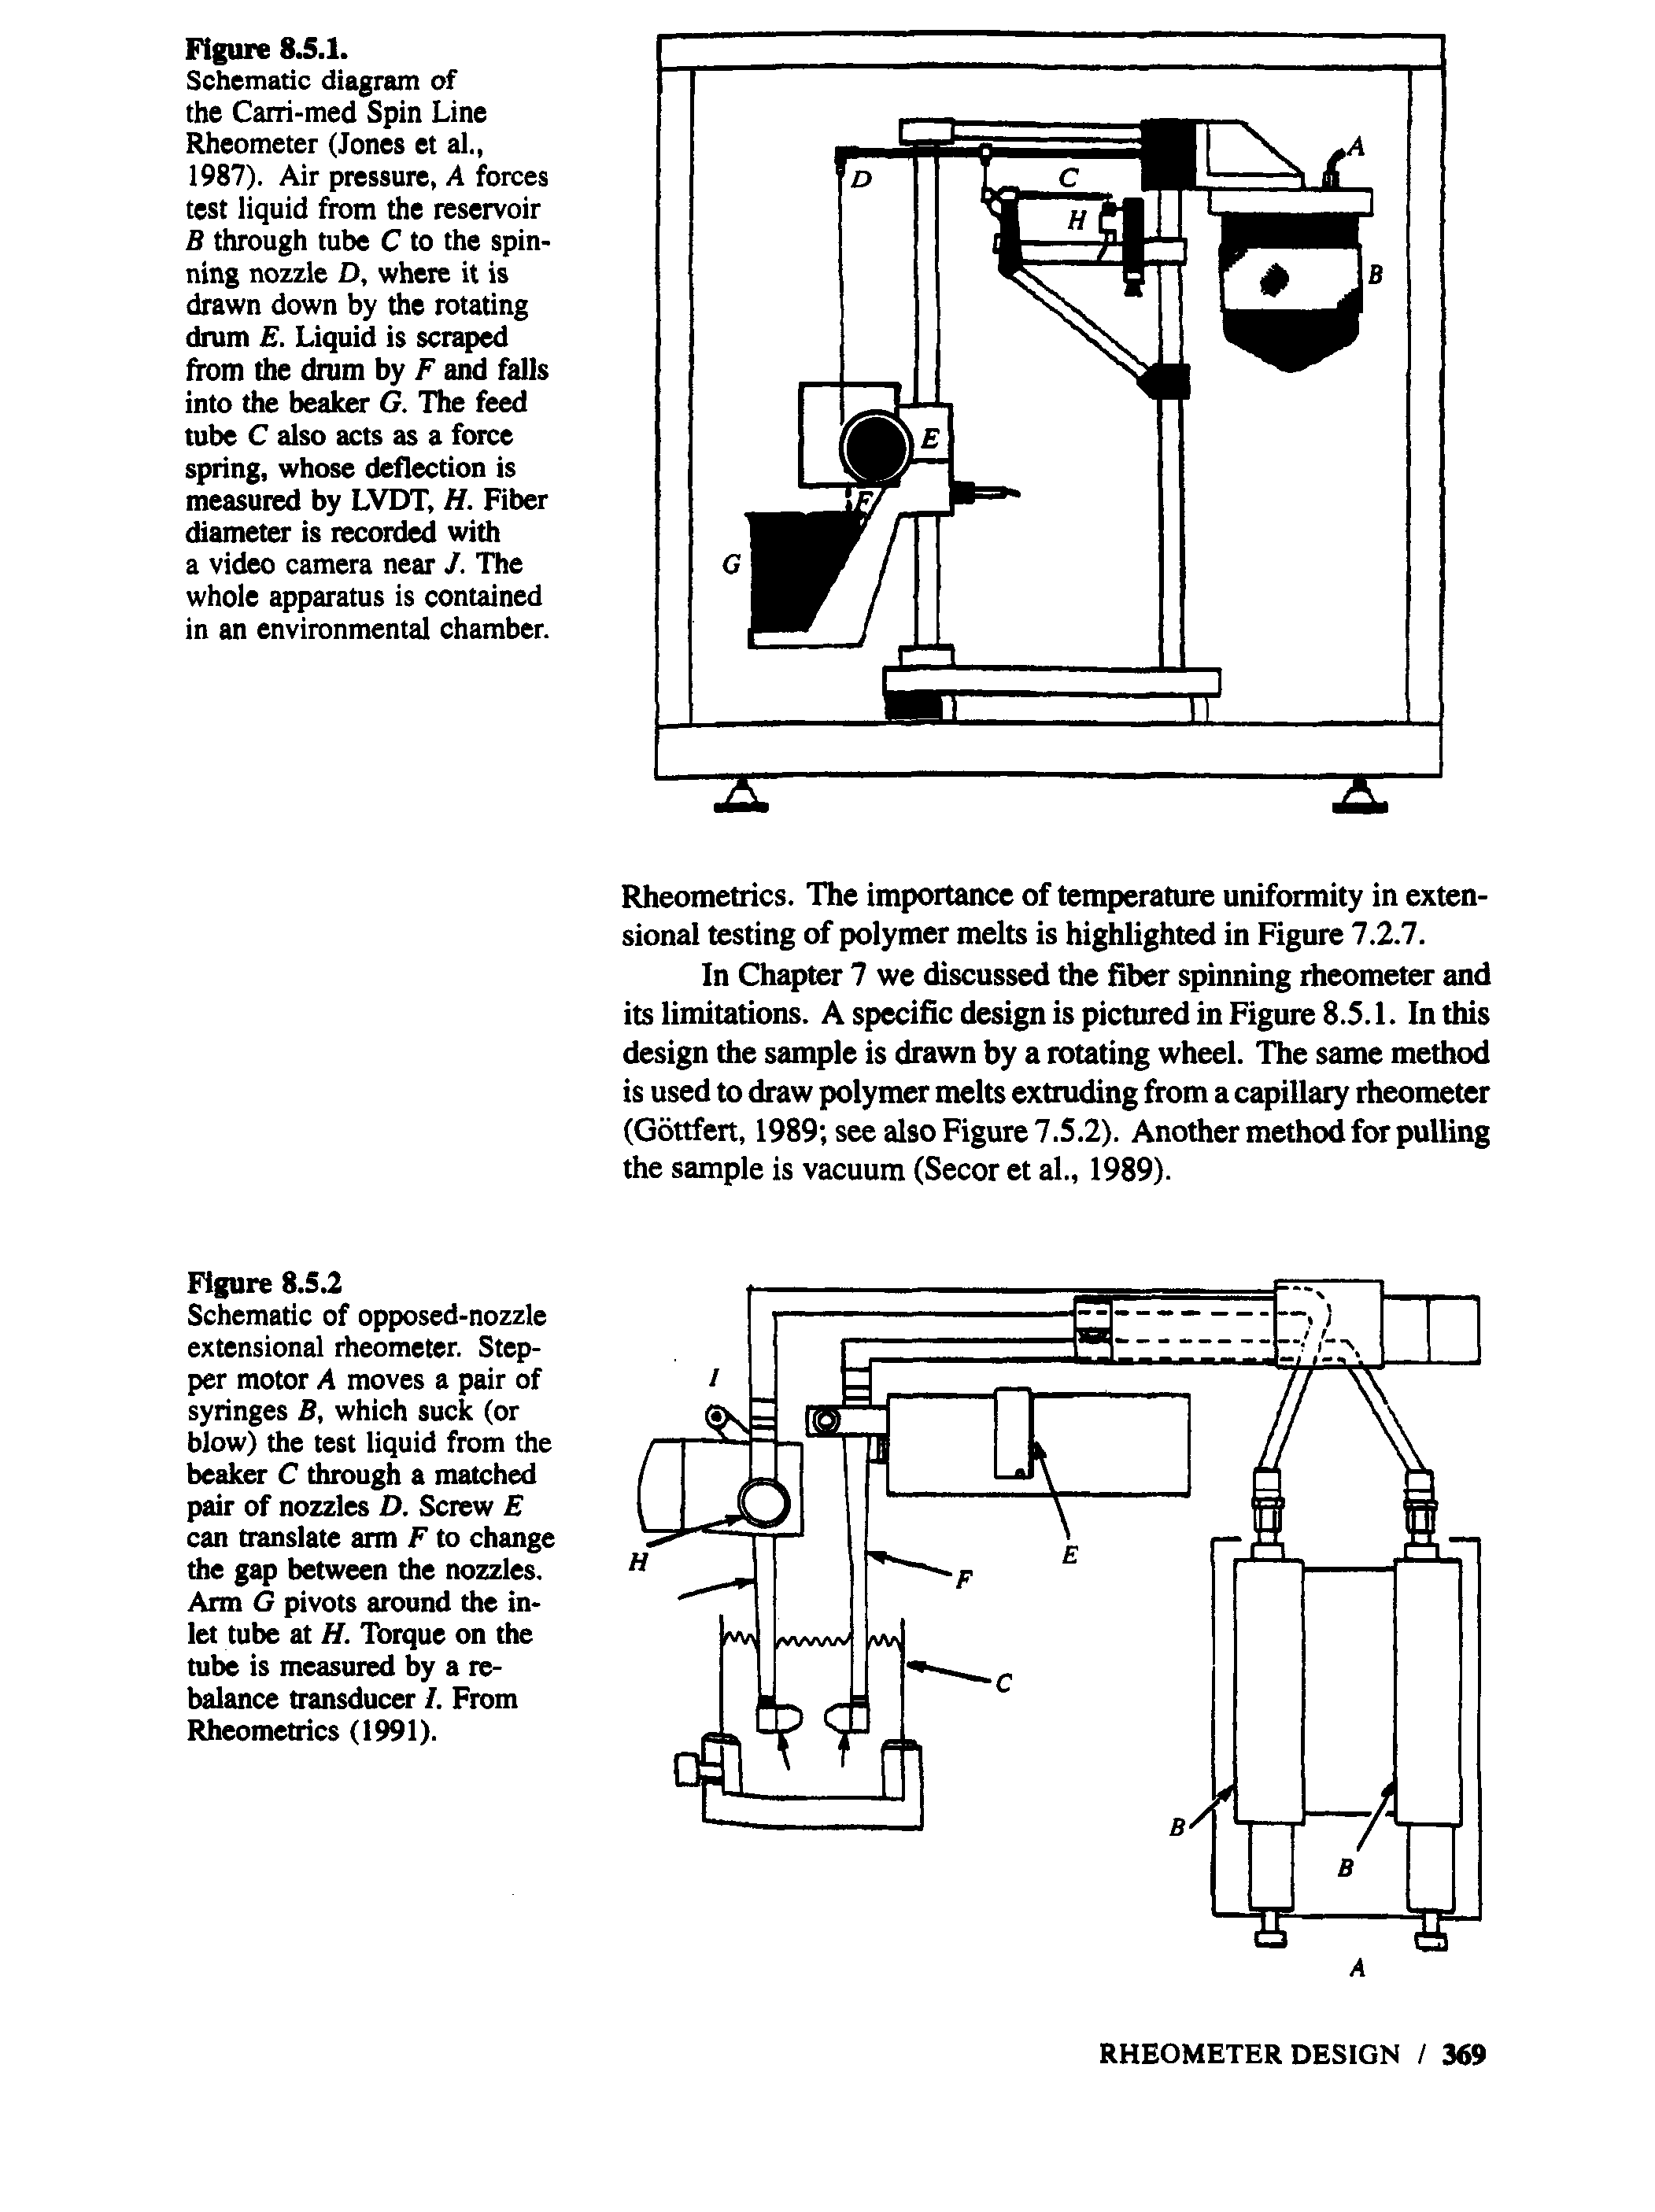 Schematic diagram of the Carri-med Spin Line Rheometer (Jones et al., 1987). Air pressure, A forces test liquid the reservoir B through tube C to the spinning nozzle D, where it is drawn down by the rotating drum E. Liquid is scraped from the drum by F and falls into the beaker G. The feed tube C also acts as a force spring, whose deflection is measured by LVDT, H. Fiber diameter is reccxrded with a video camera near J. The whole apparatus is contained in an environmental chamber.